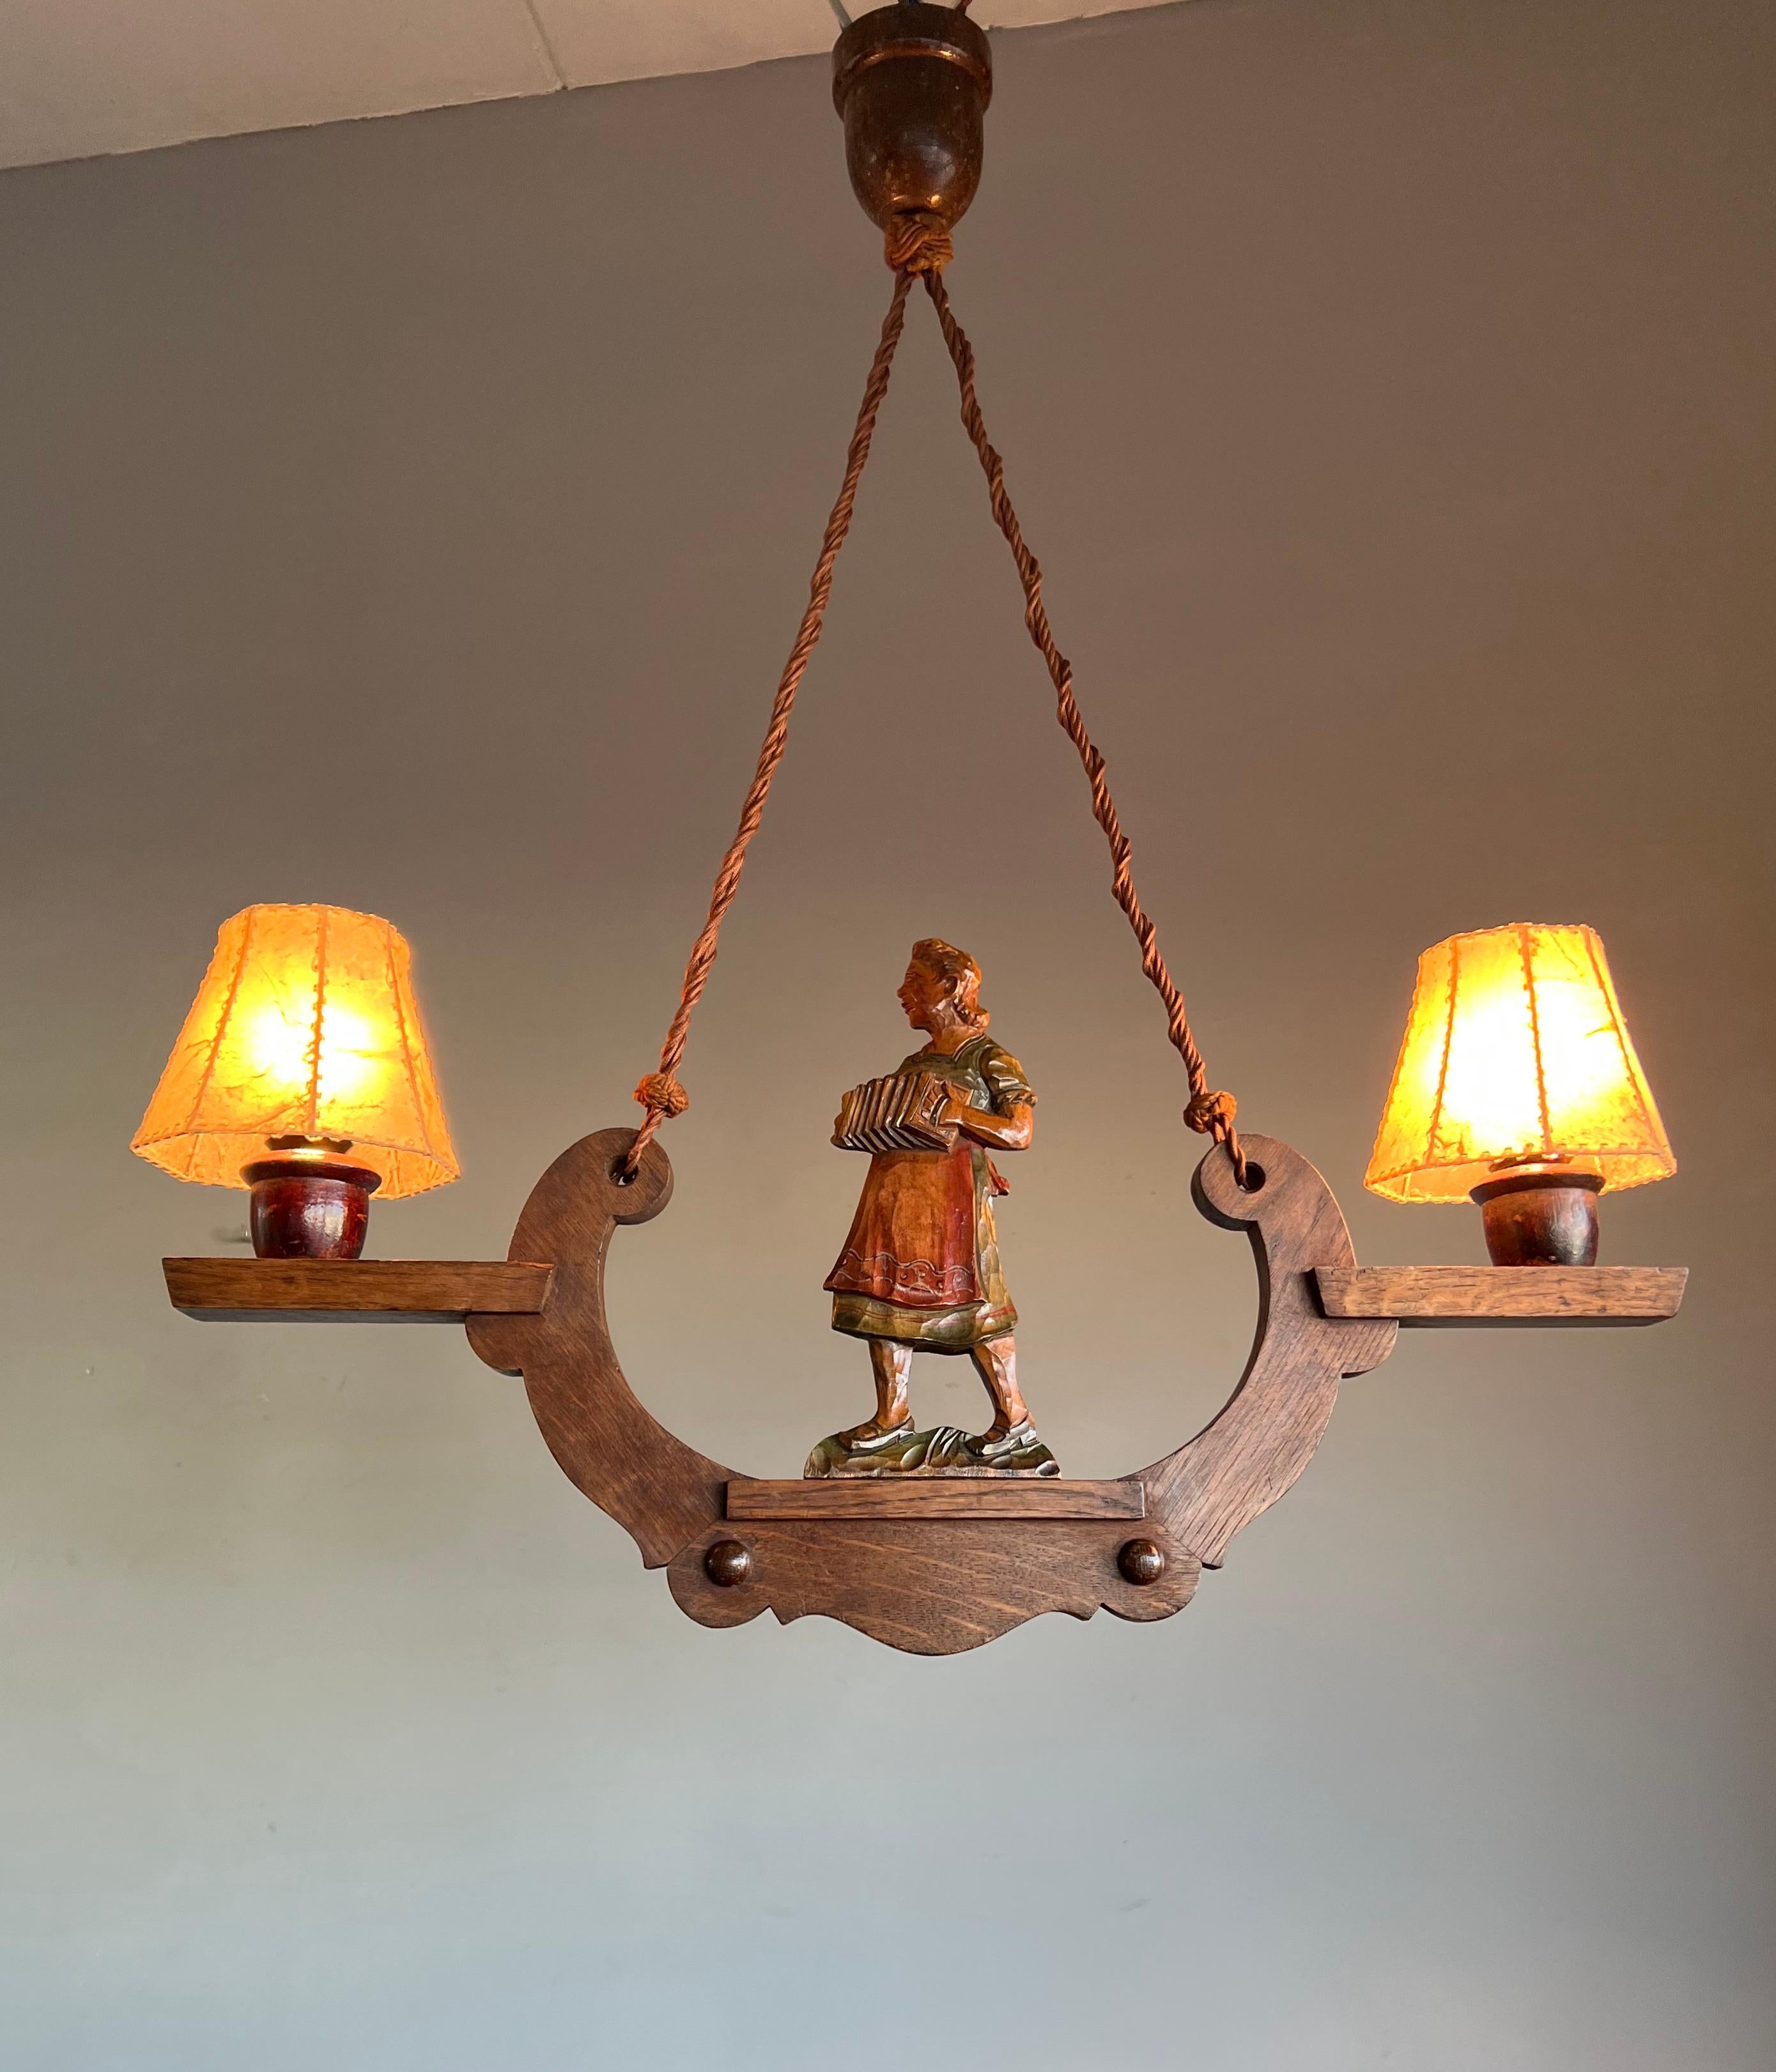 20th Century Antique Hand Carved Folk Art Pendant Light w. Accordion Playing 'Madchen' on Top For Sale